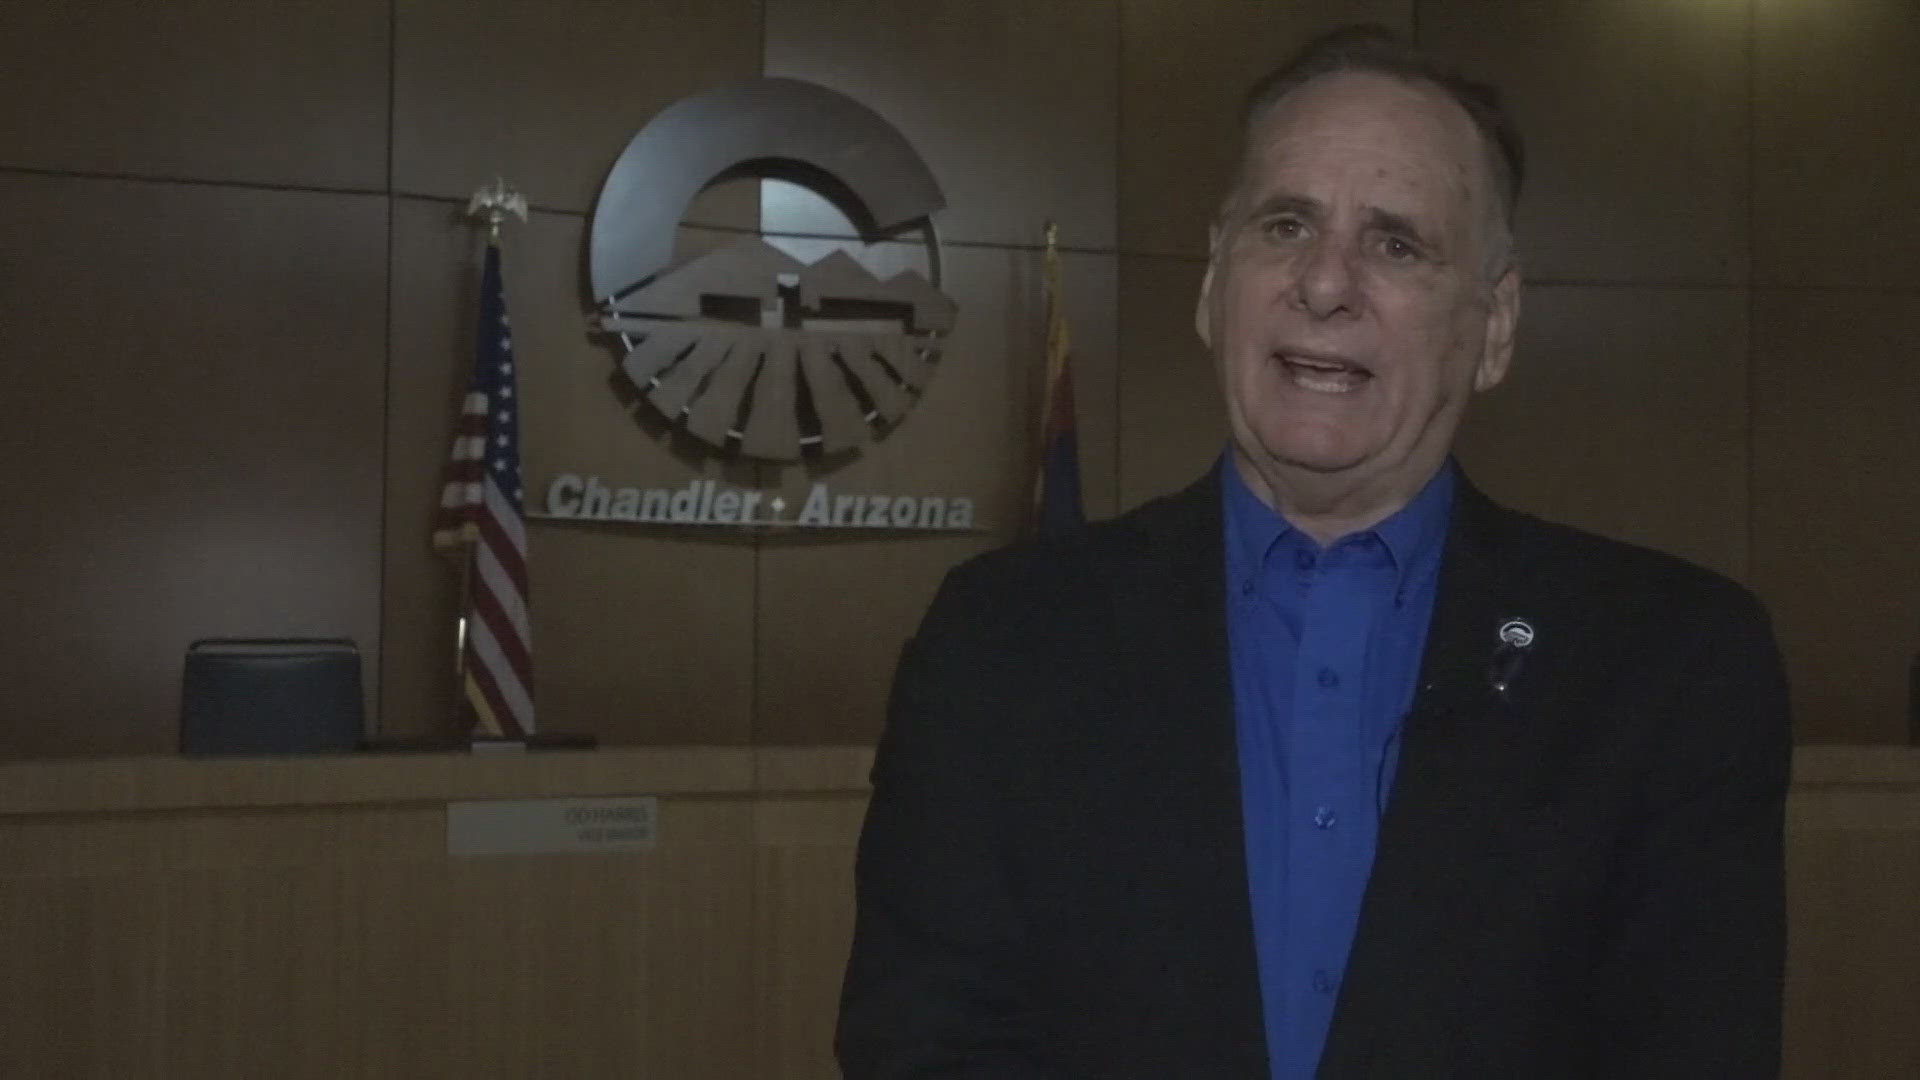 The Chandler Mayor said he is confident the brass knuckles ban and unruly gatherings ordinances will pass the final vote during a vote Thursday.